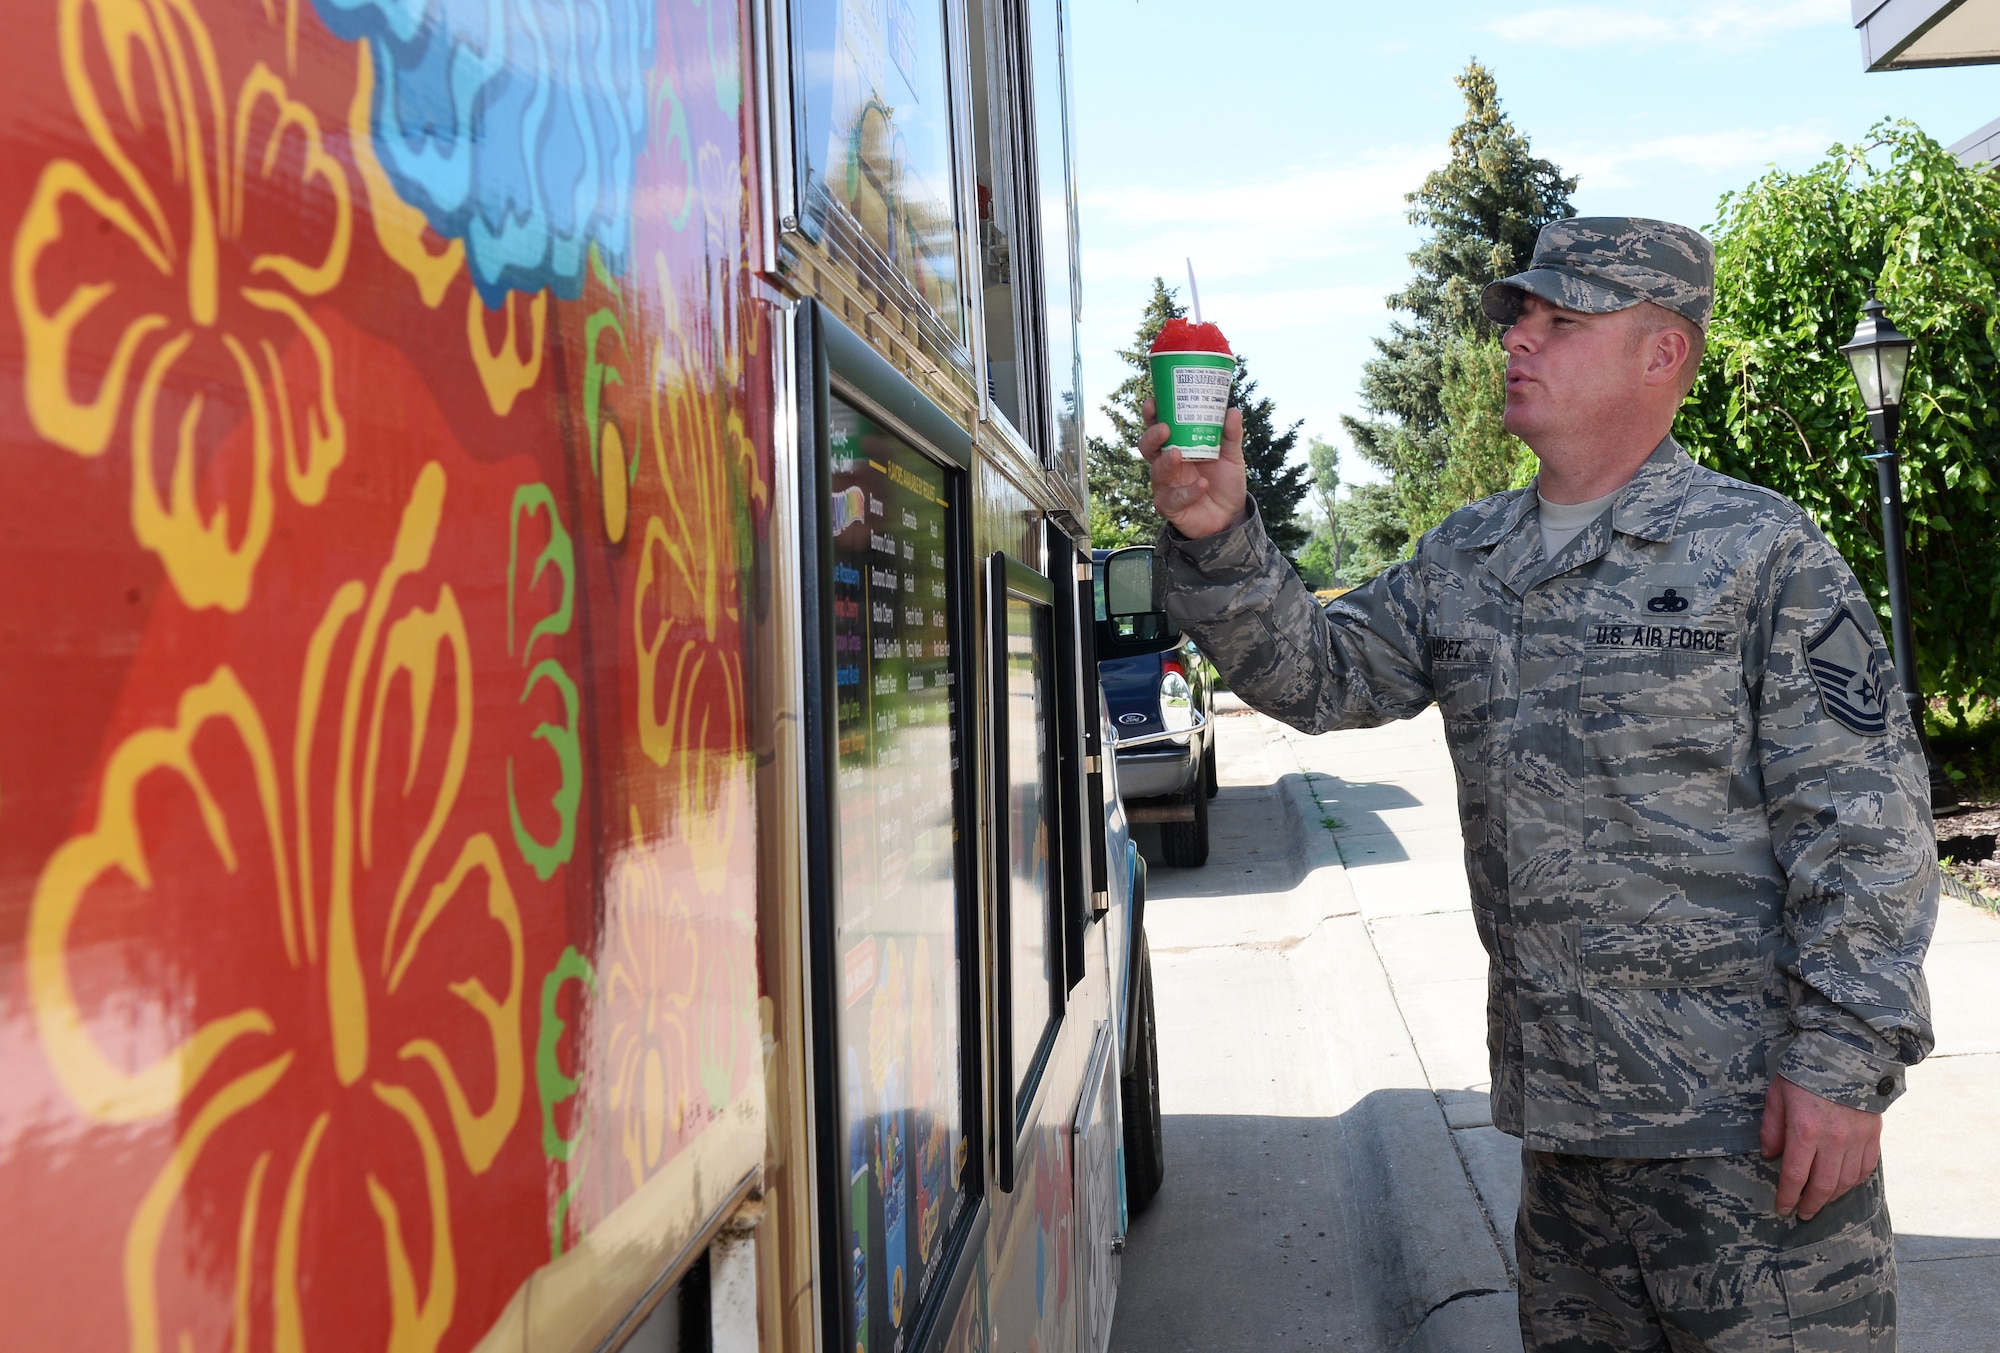 U.S. Air Force Master Sgt. Vicent Lopez, 55th Aircraft Maintenance Squadron, receives a tropical flavored shaved ice June 20, 2019, during a morale event at the Warhawk Community Center on Offutt Air Force Base, Nebraska. Shaved ice was served to team Offutt members at the Warhawk Community Center, 55th Wing Base Operations building and the Martin Bomber building. (U.S. Air Force photo by Charles J. Haymond)